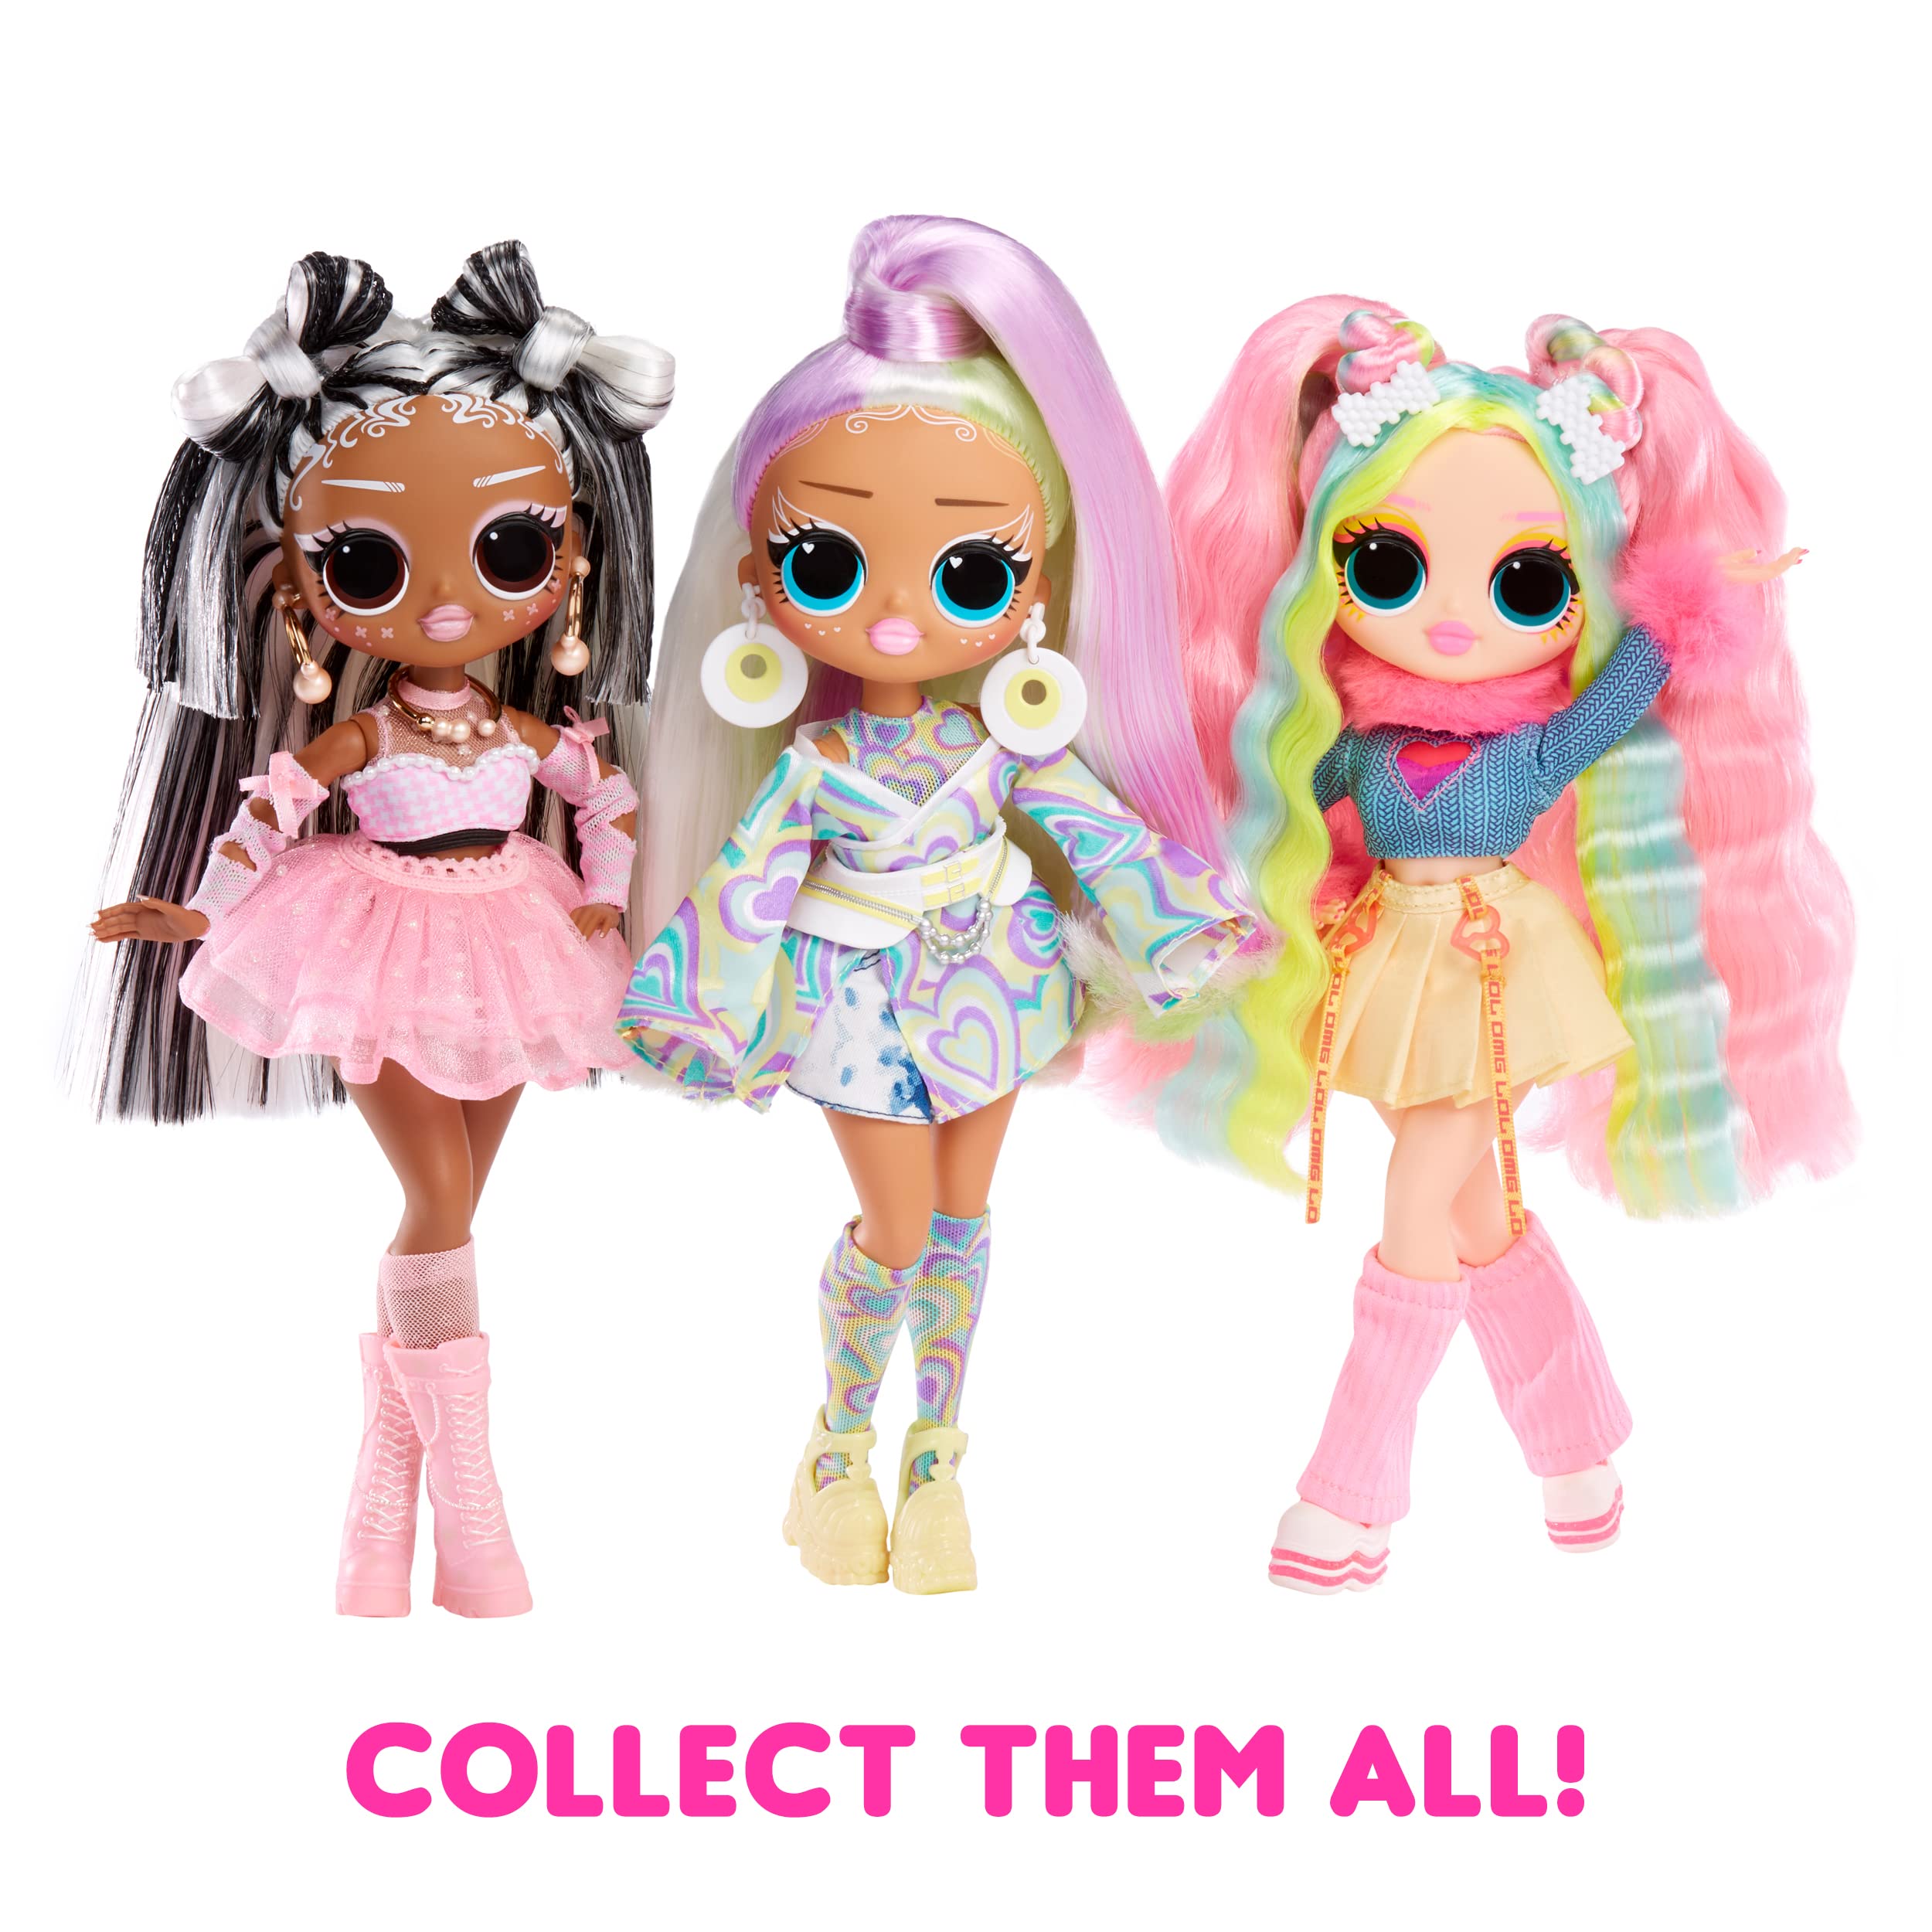 L.O.L. Surprise! LOL Surprise OMG Sunshine Color Change Sunrise Fashion Doll with Color Changing Hair and Fashions and Multiple Surprises – Great Gift for Kids Ages 4+